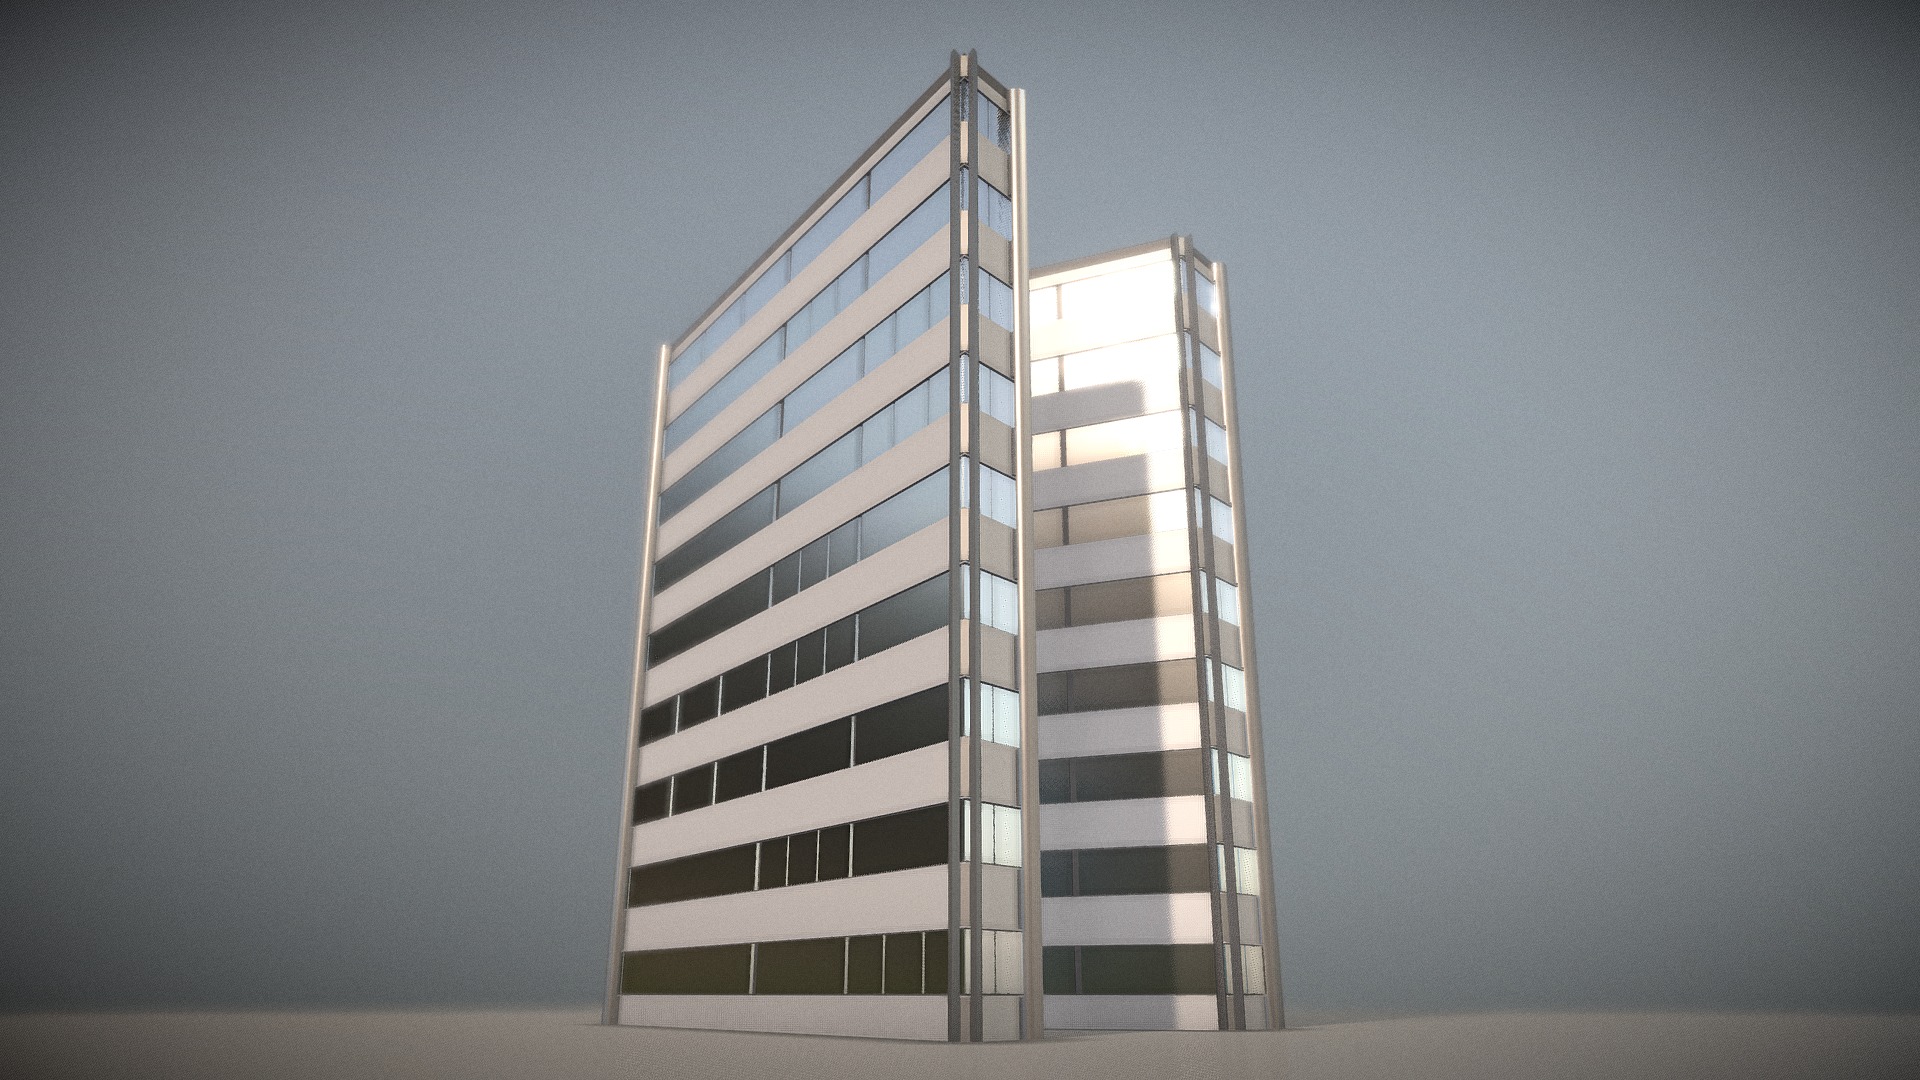 3D model City Building Design V-1 - This is a 3D model of the City Building Design V-1. The 3D model is about a tall building with windows.